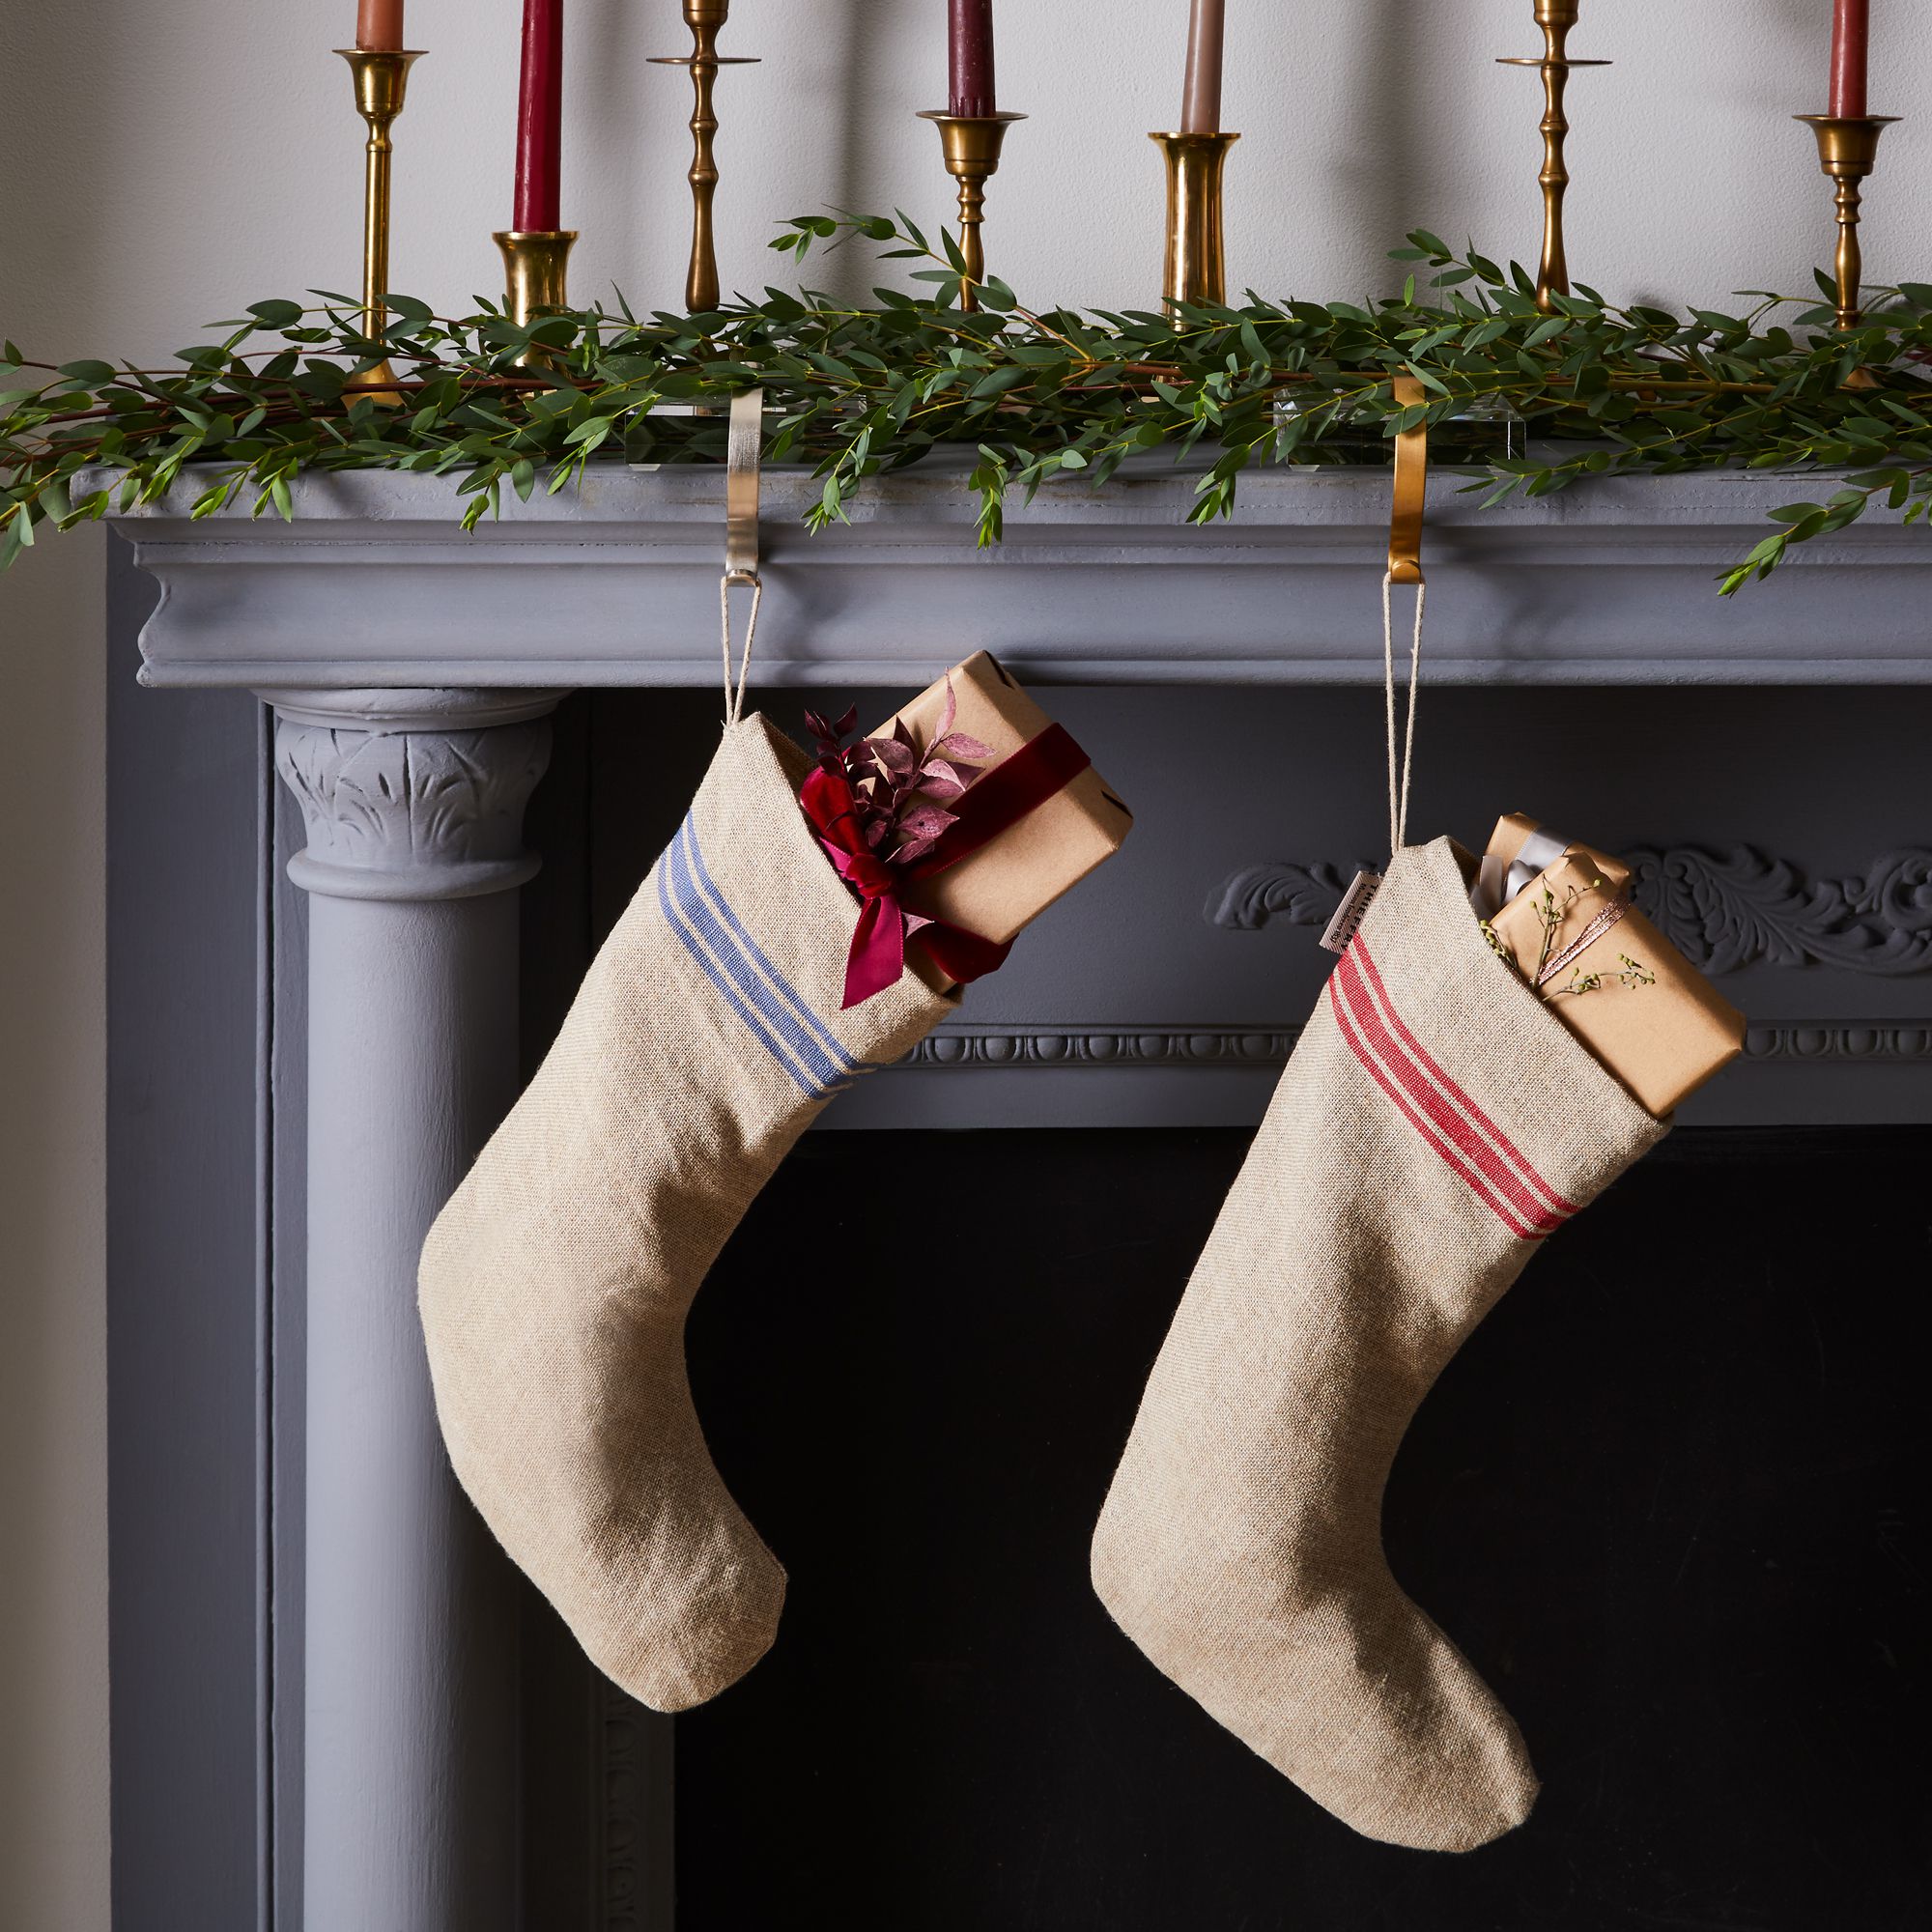 Details about   Brand New Limited Edition Designer Handcrafted Christmas Stockings 